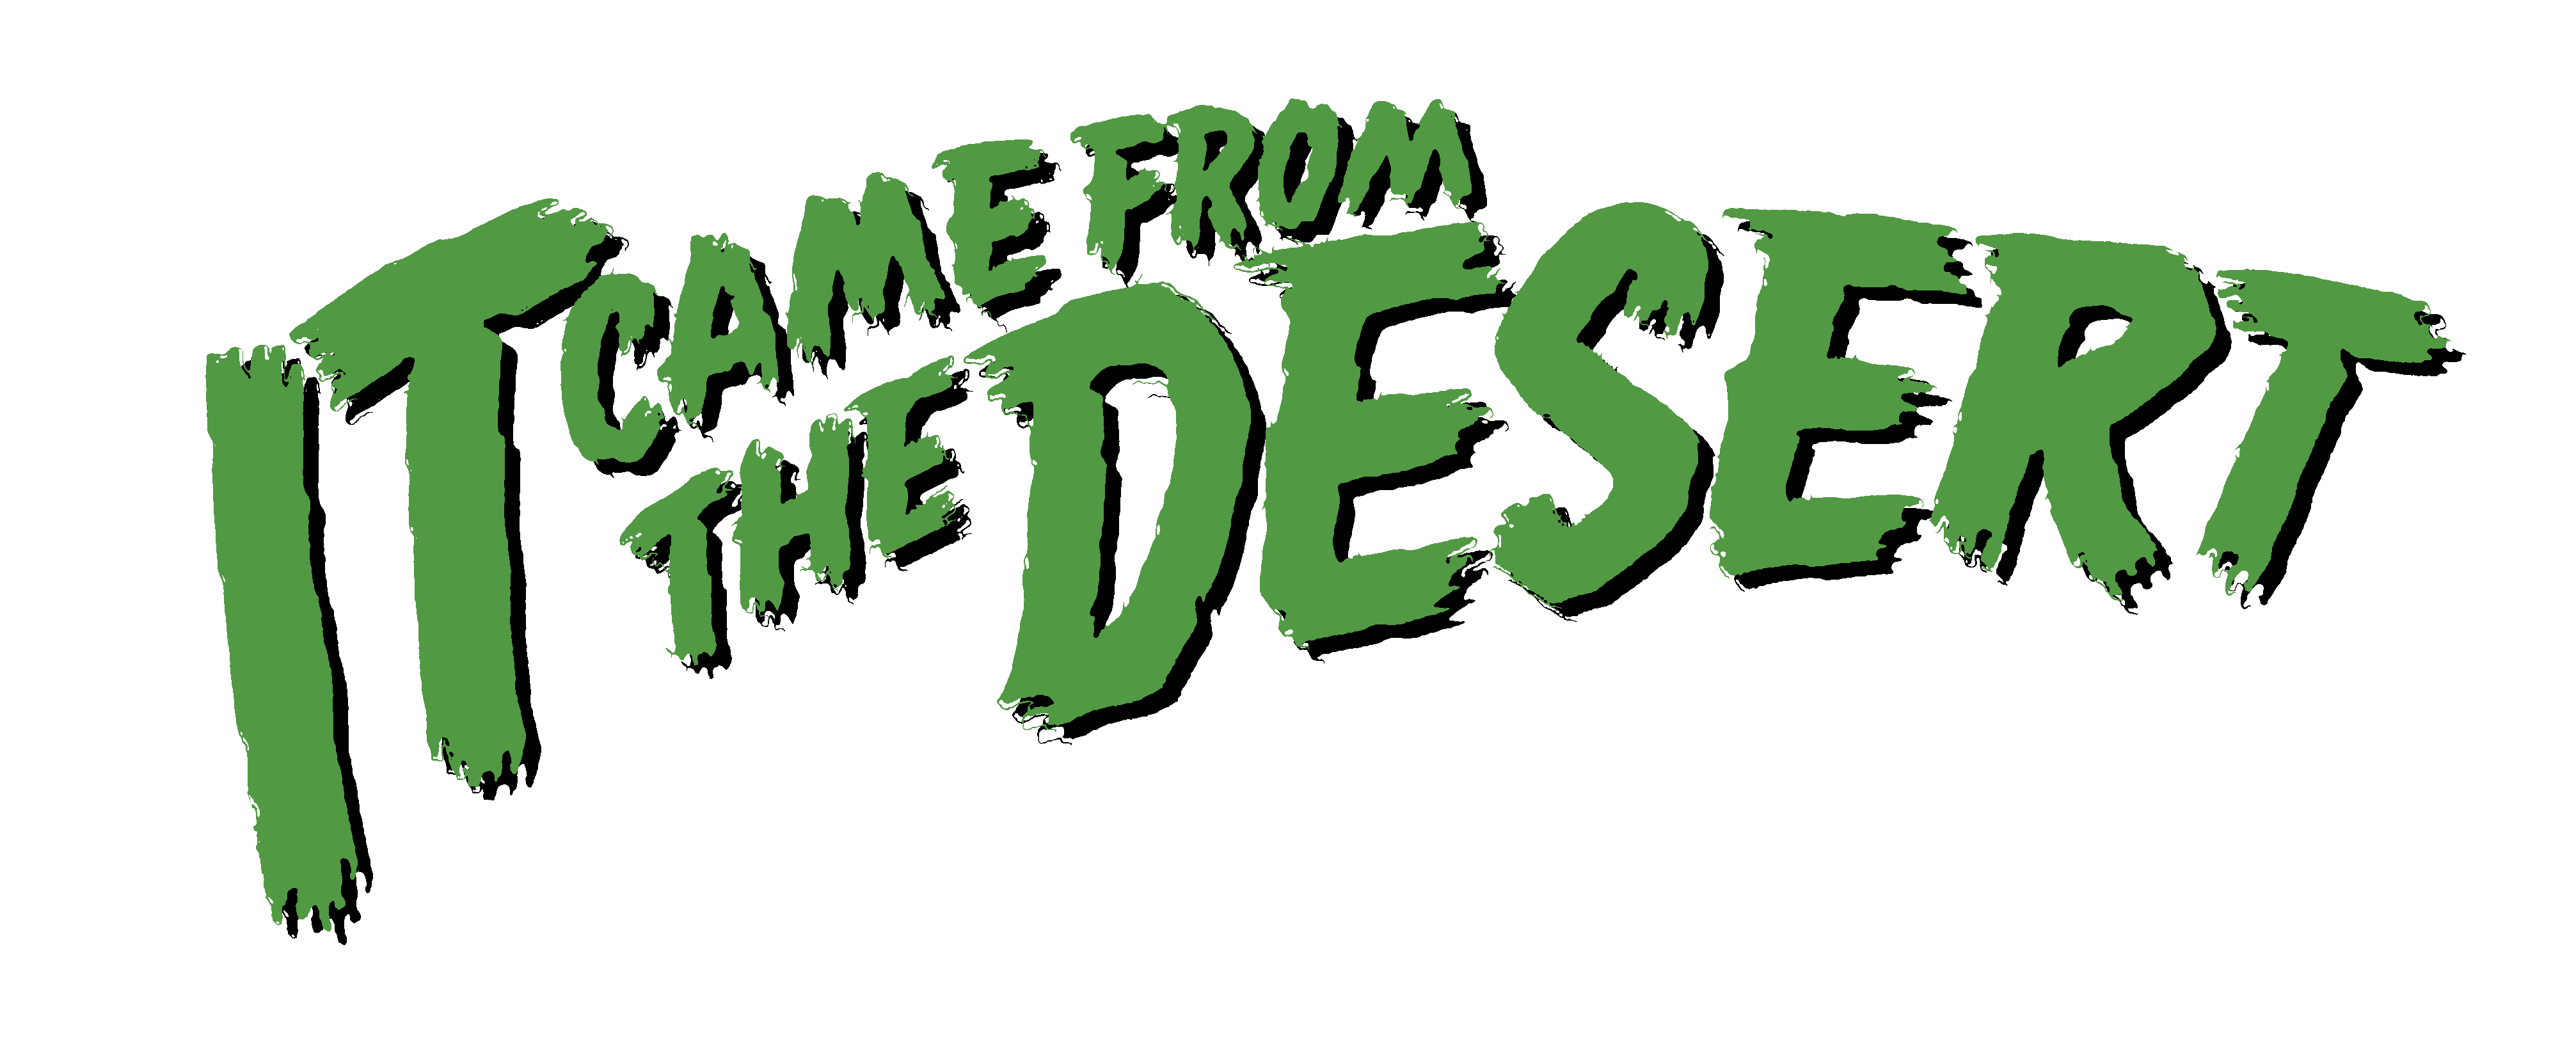 It Came From The Desert Images - LaunchBox Games Database